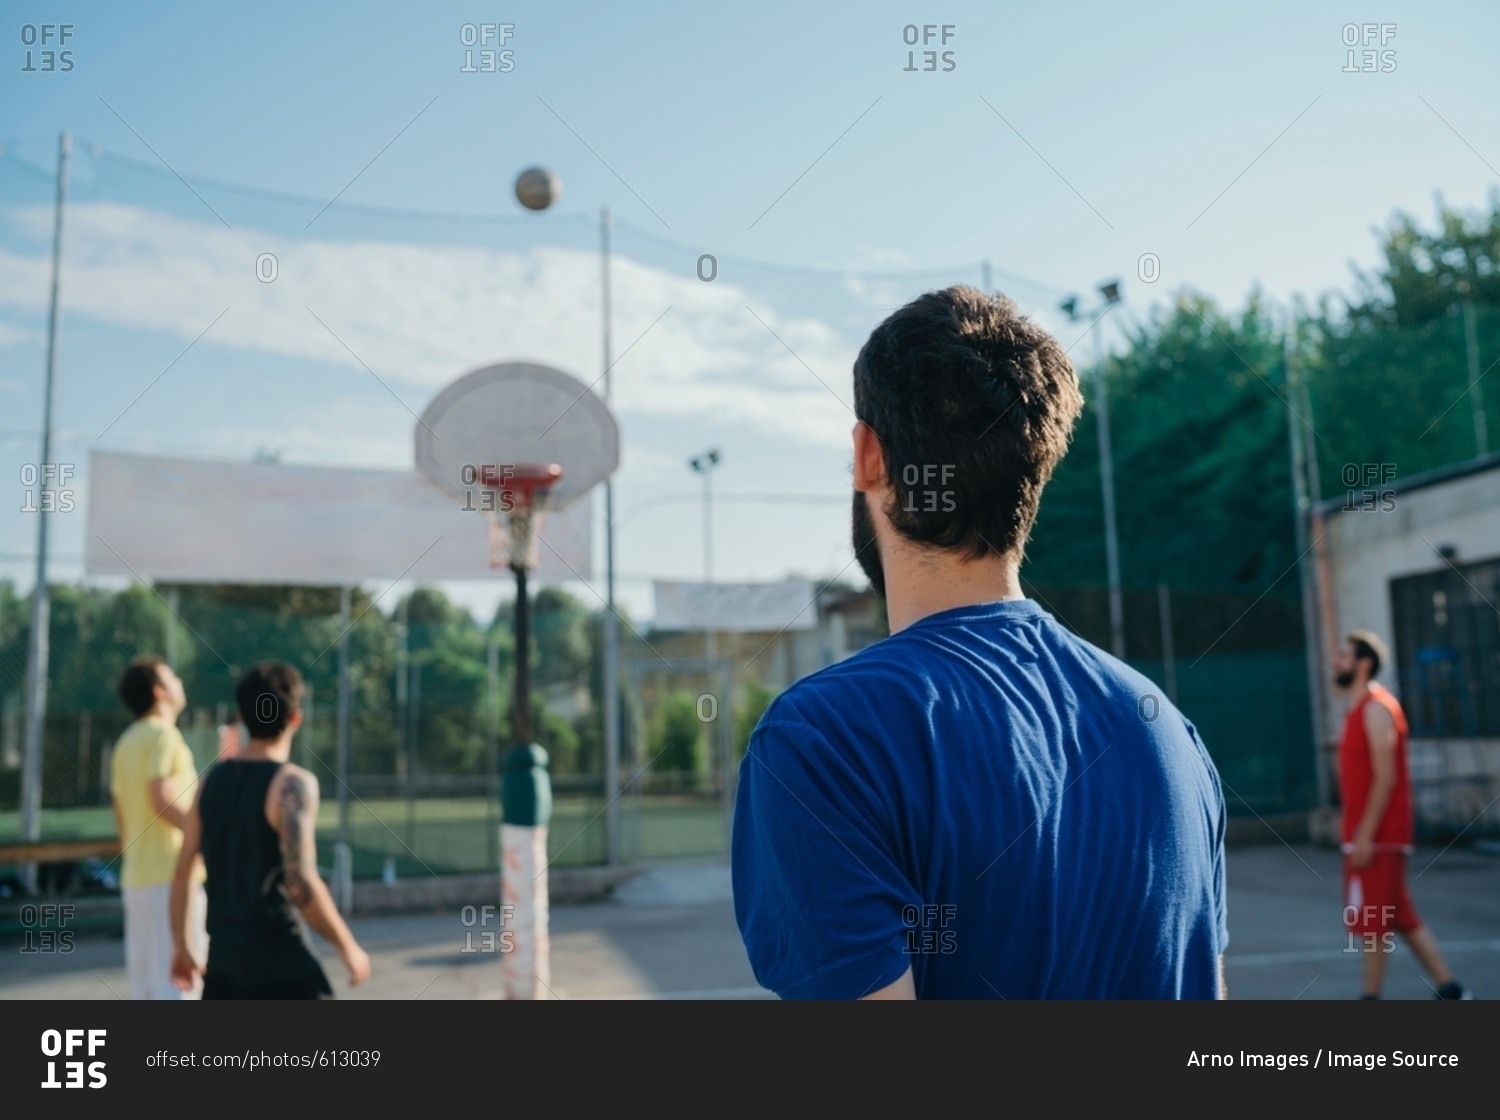 Friends on basketball court playing basketball game